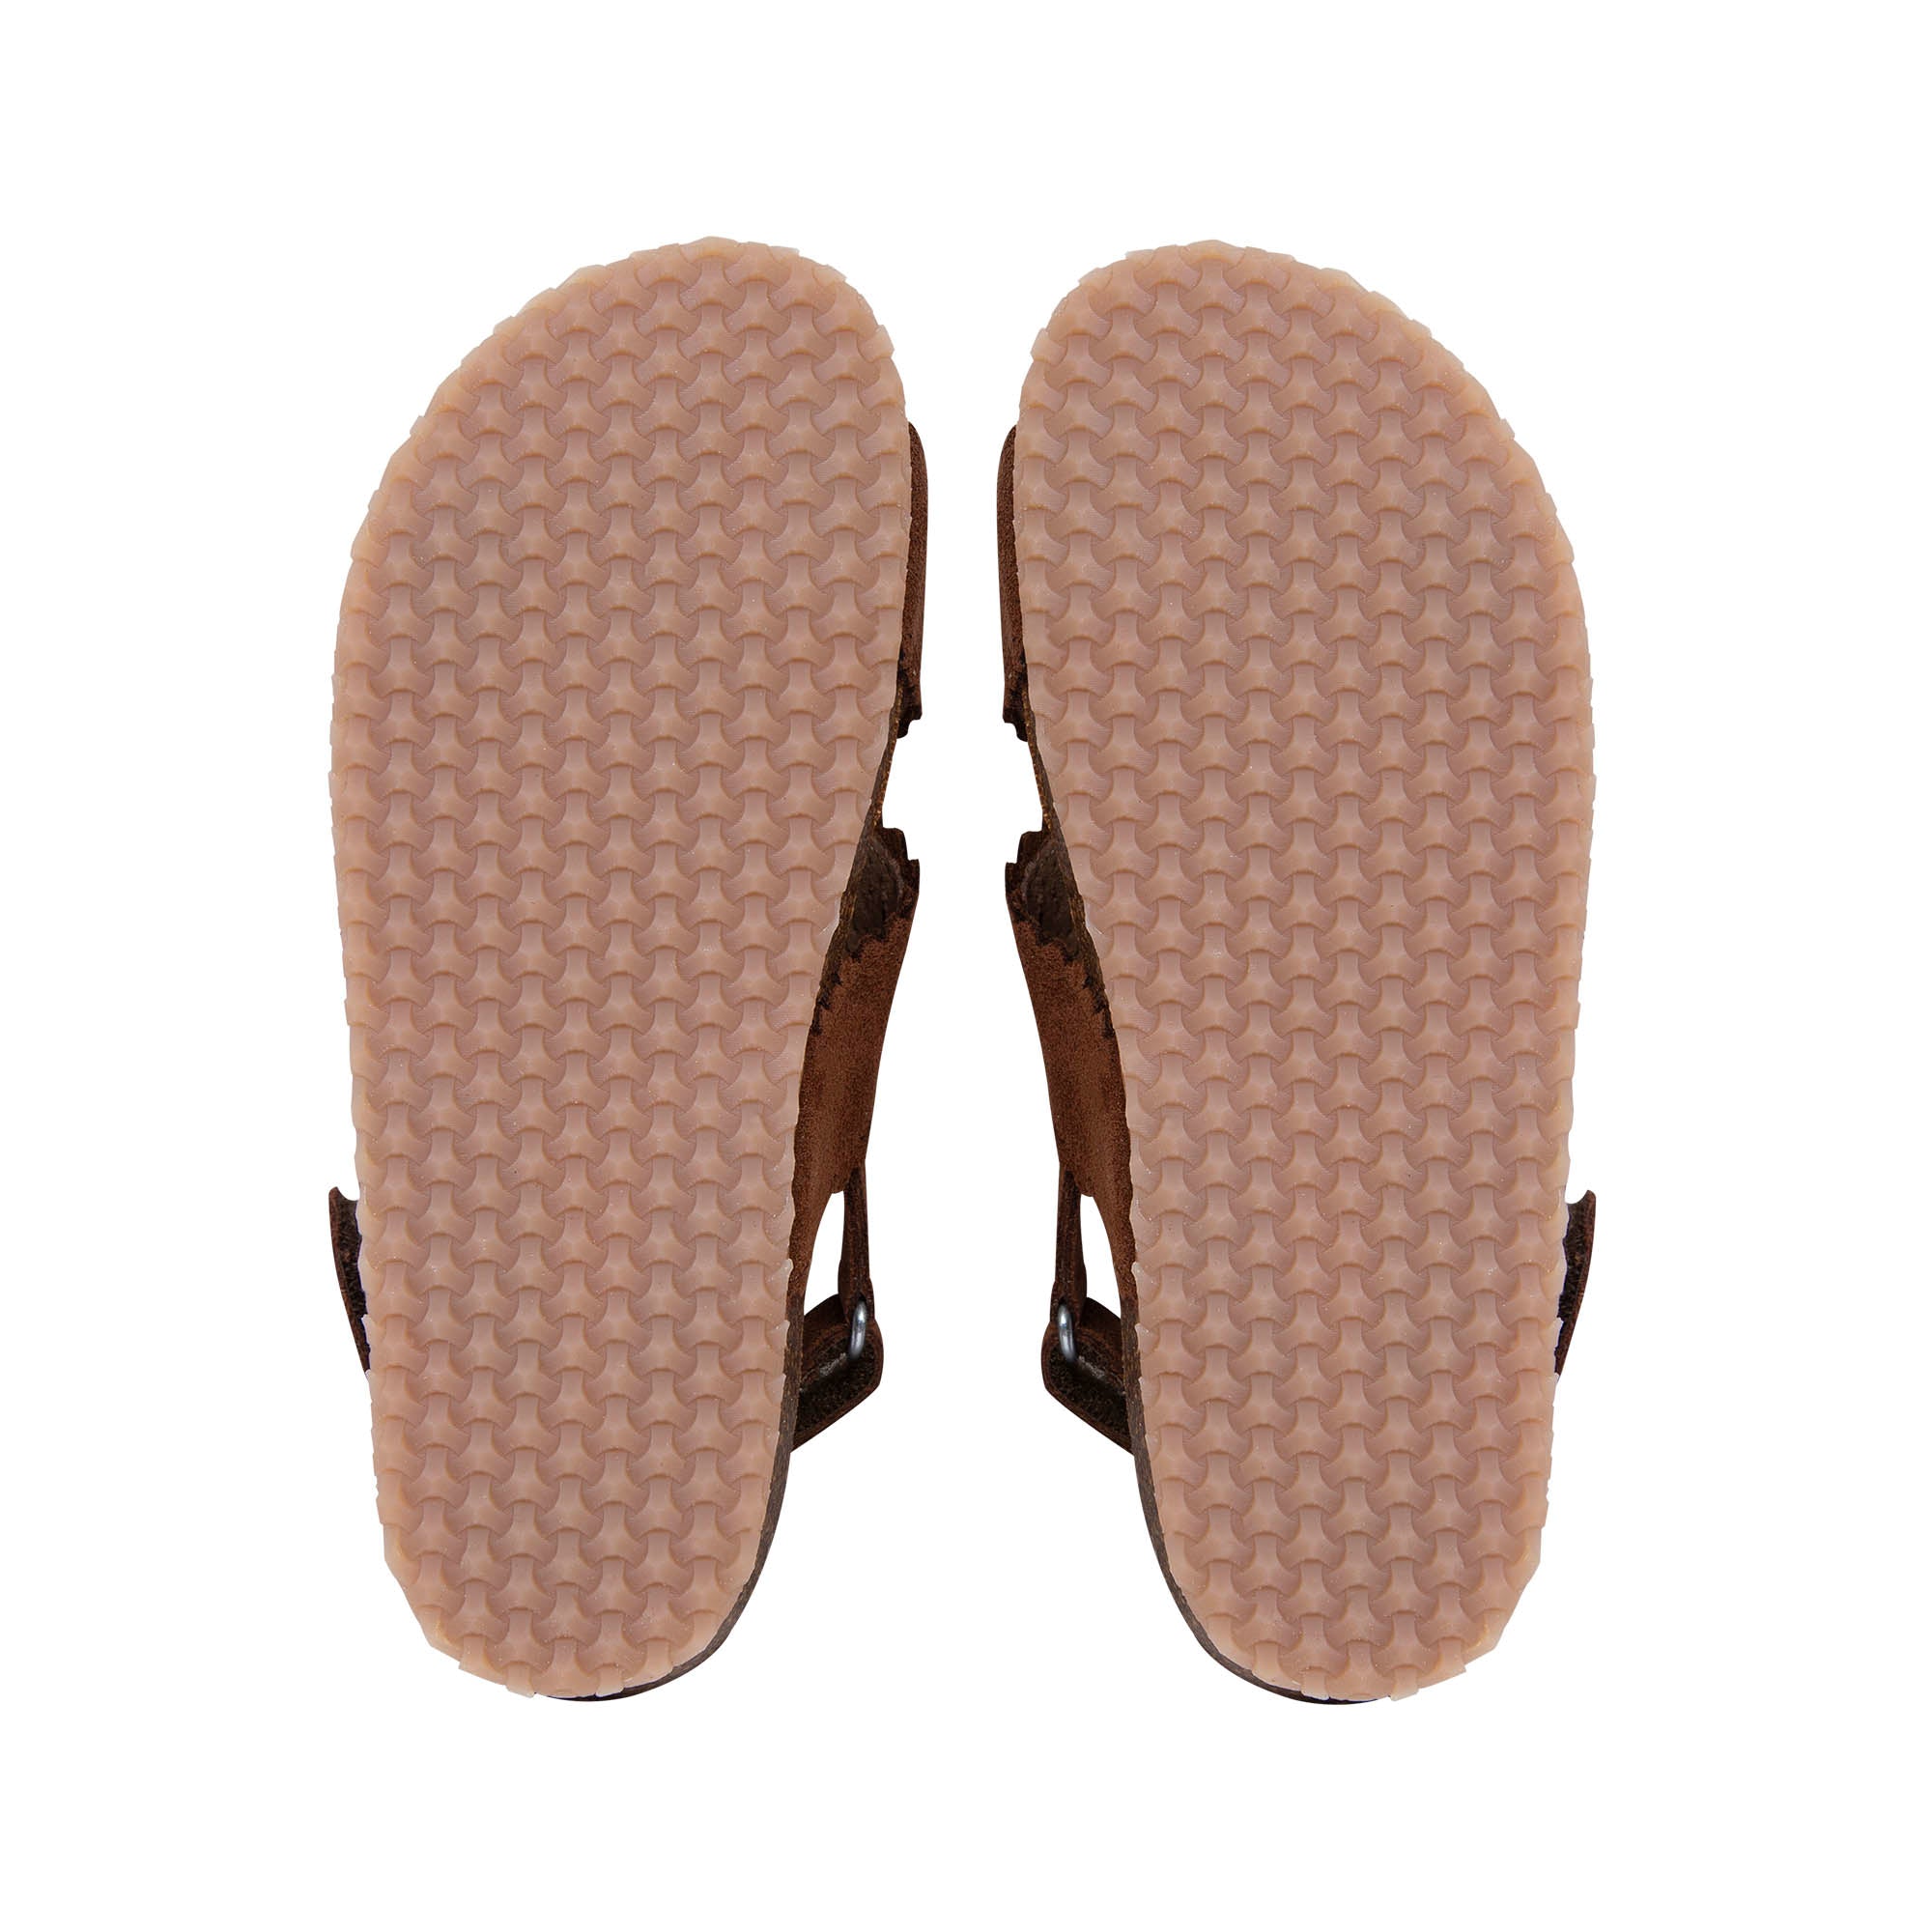 Boys & Girls Brown Cut-out Sandals